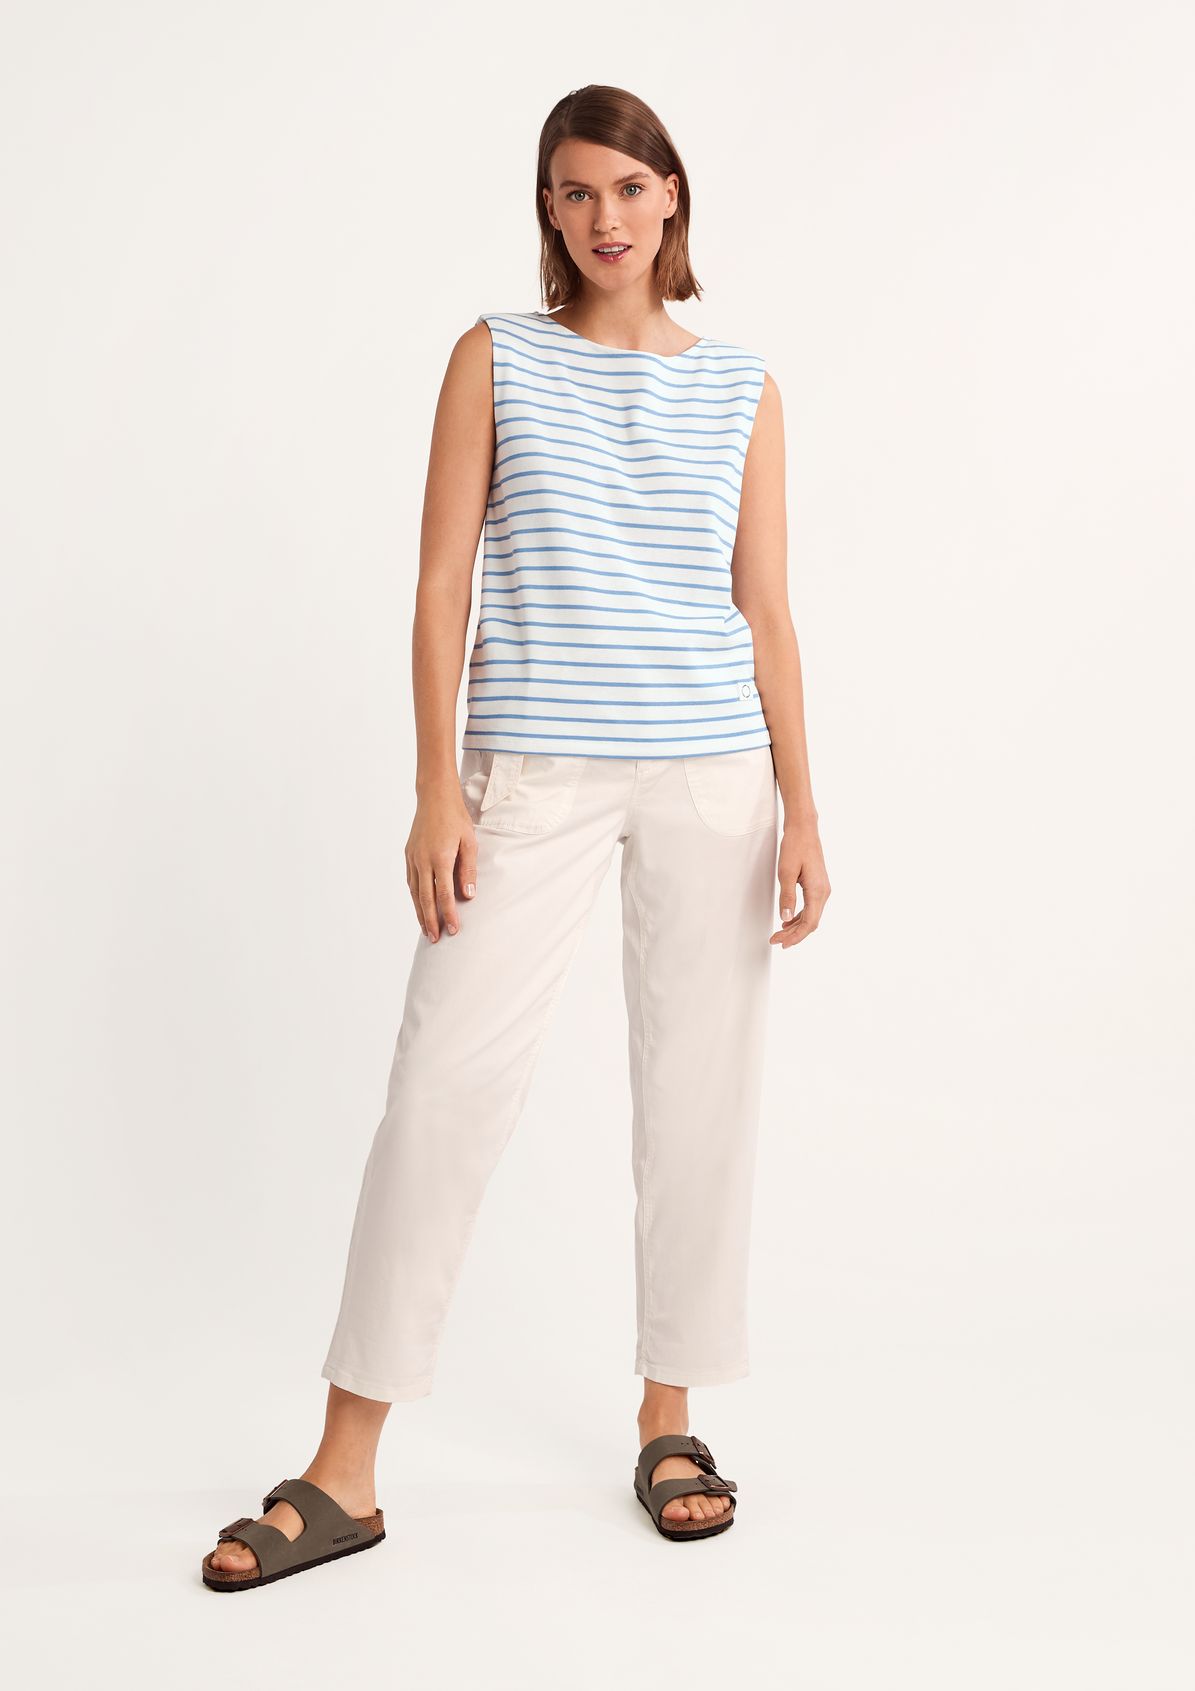 Striped jersey top from comma